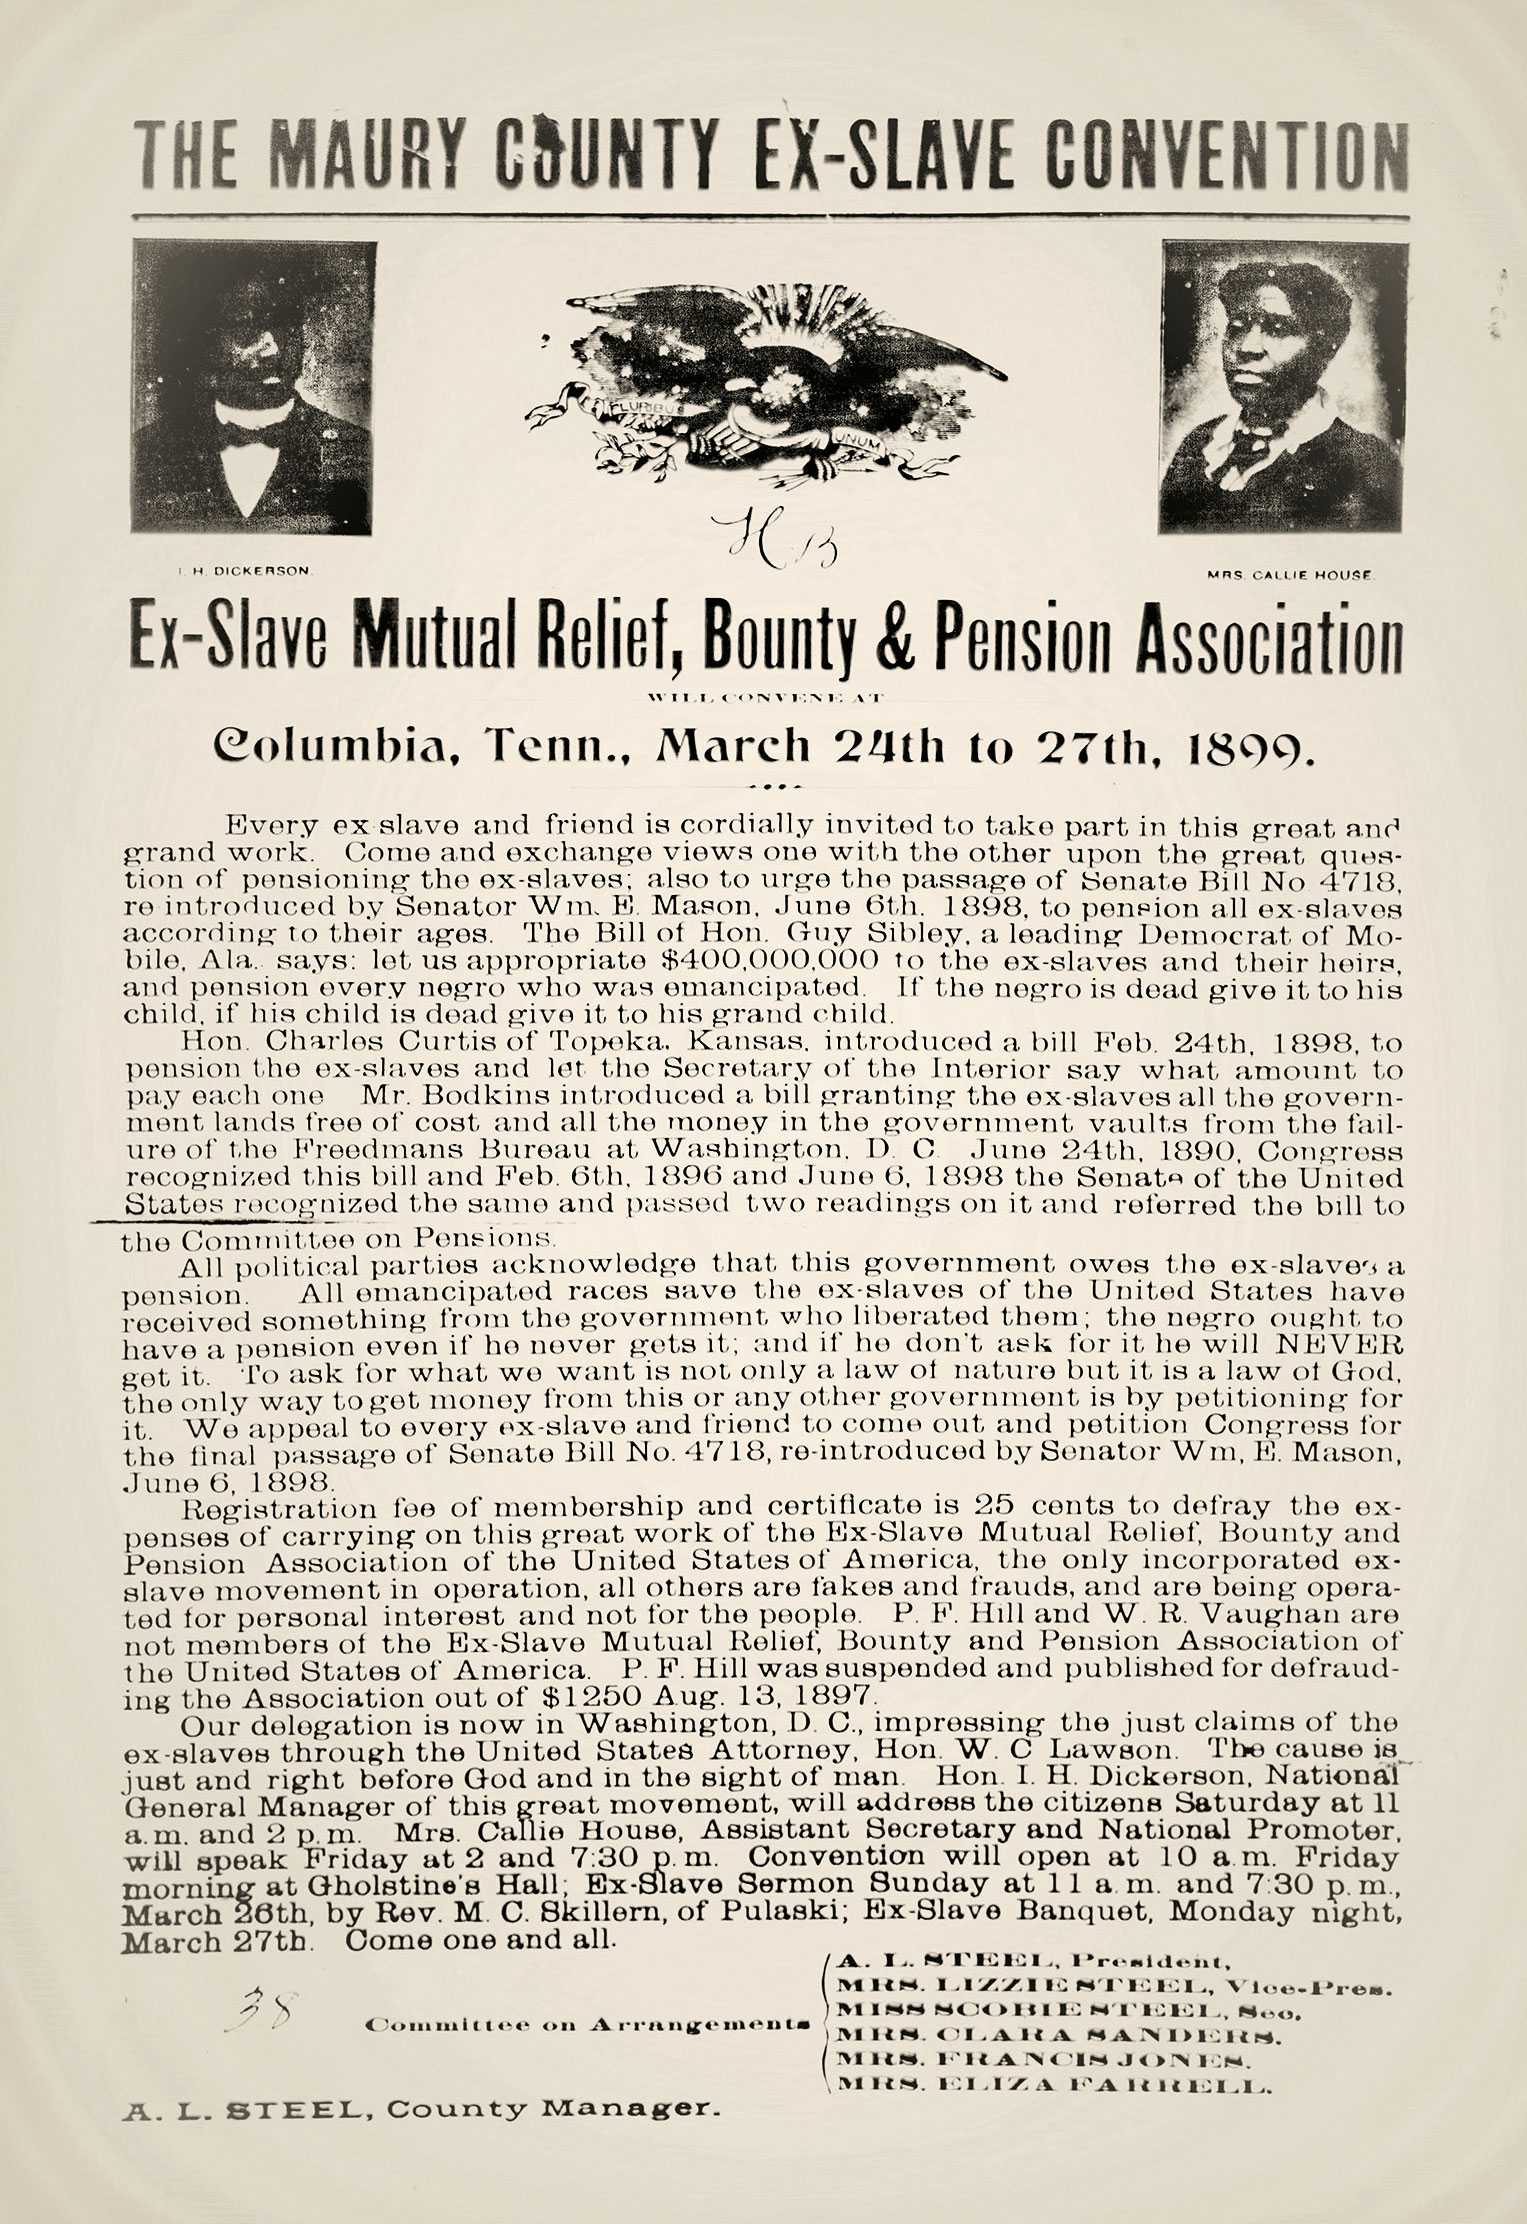 An worn paper of that says 'Ex-Slave Mutual Relief, Bounty and Pension Association broadside' Dated 1899.